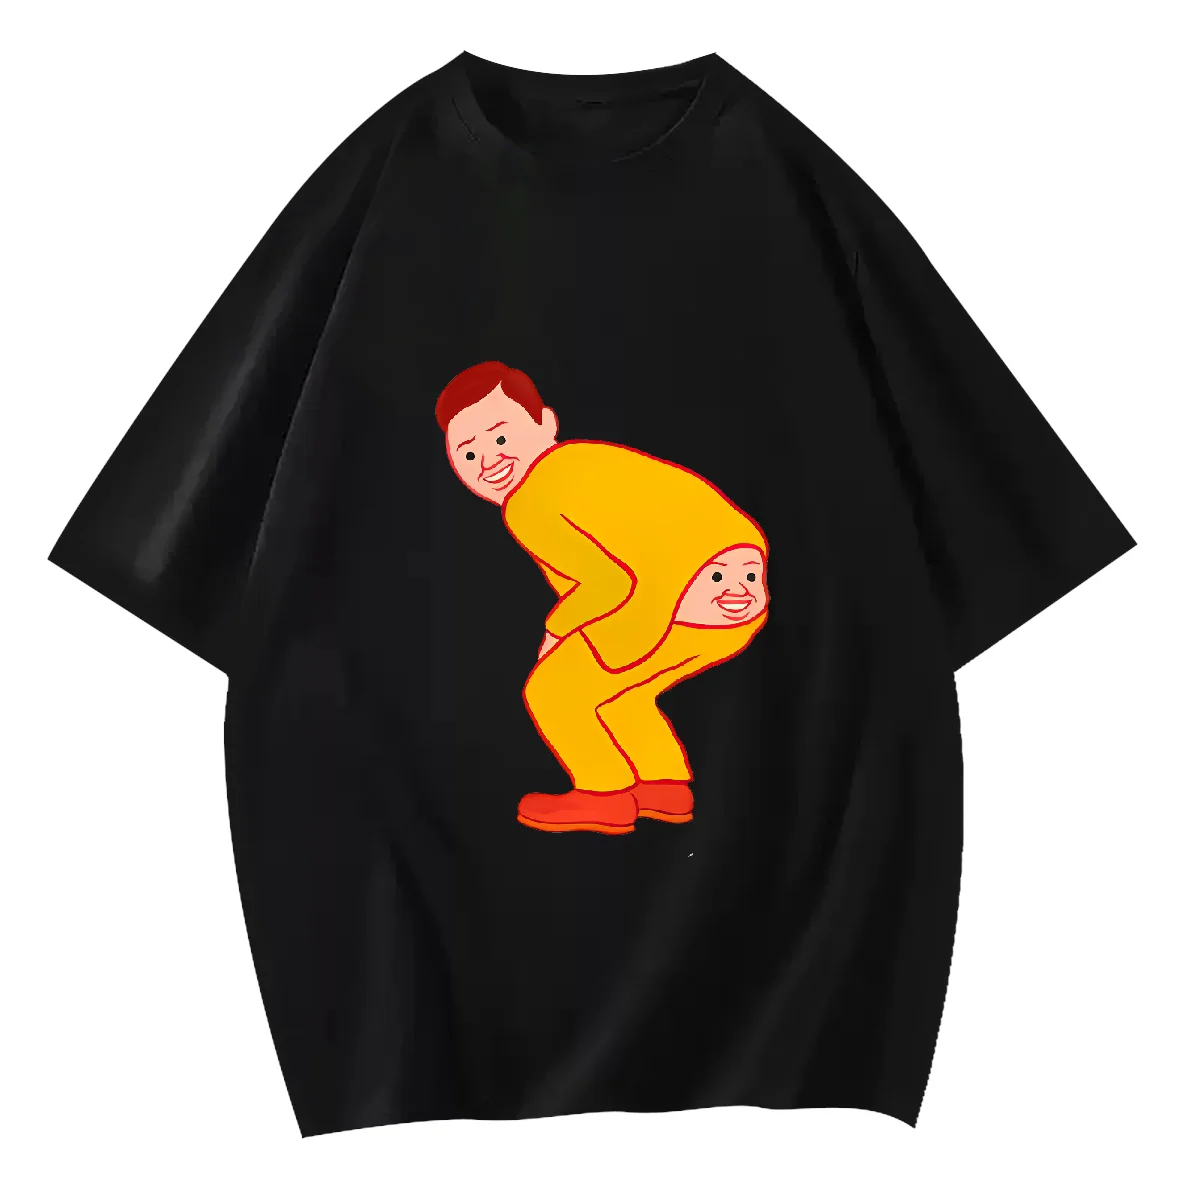 

Spoof T Shirt The man who leaked his ass Oversized Loose Breathable Short Sleeve High Quality Fashion Casual Top 100% Cotton Tee